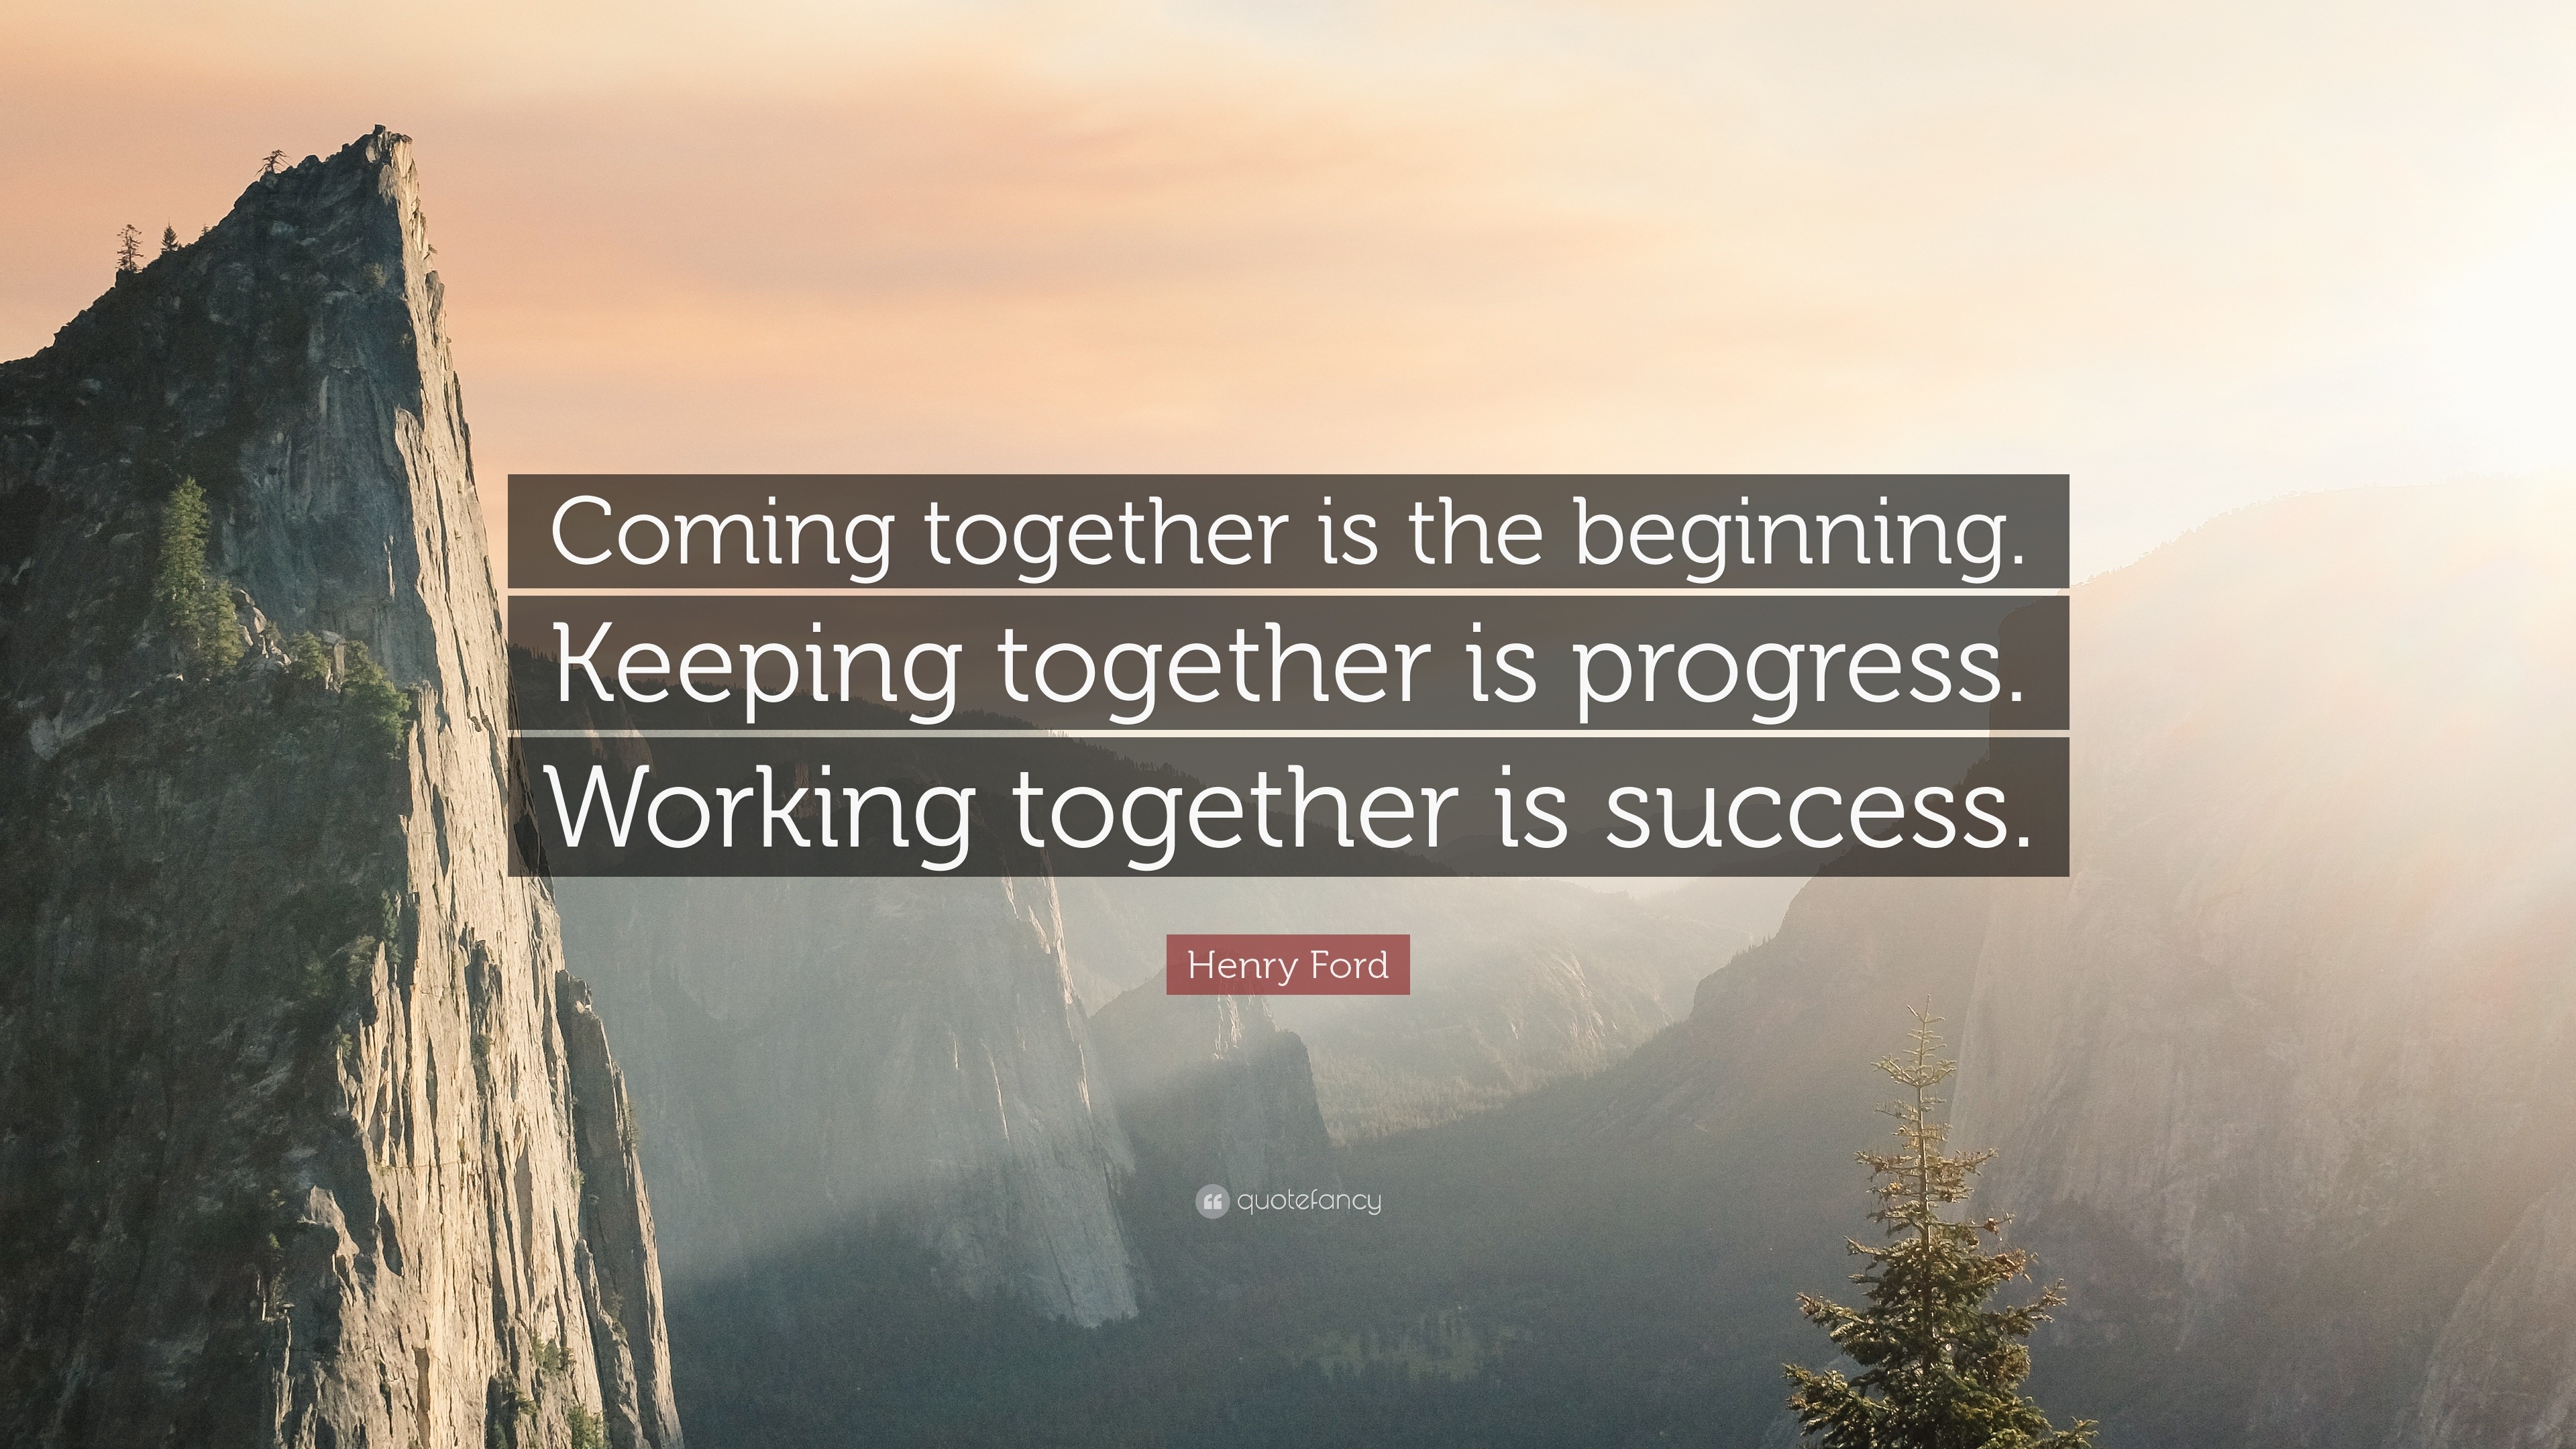 Henry Ford Quote: "Coming together is the beginning ...